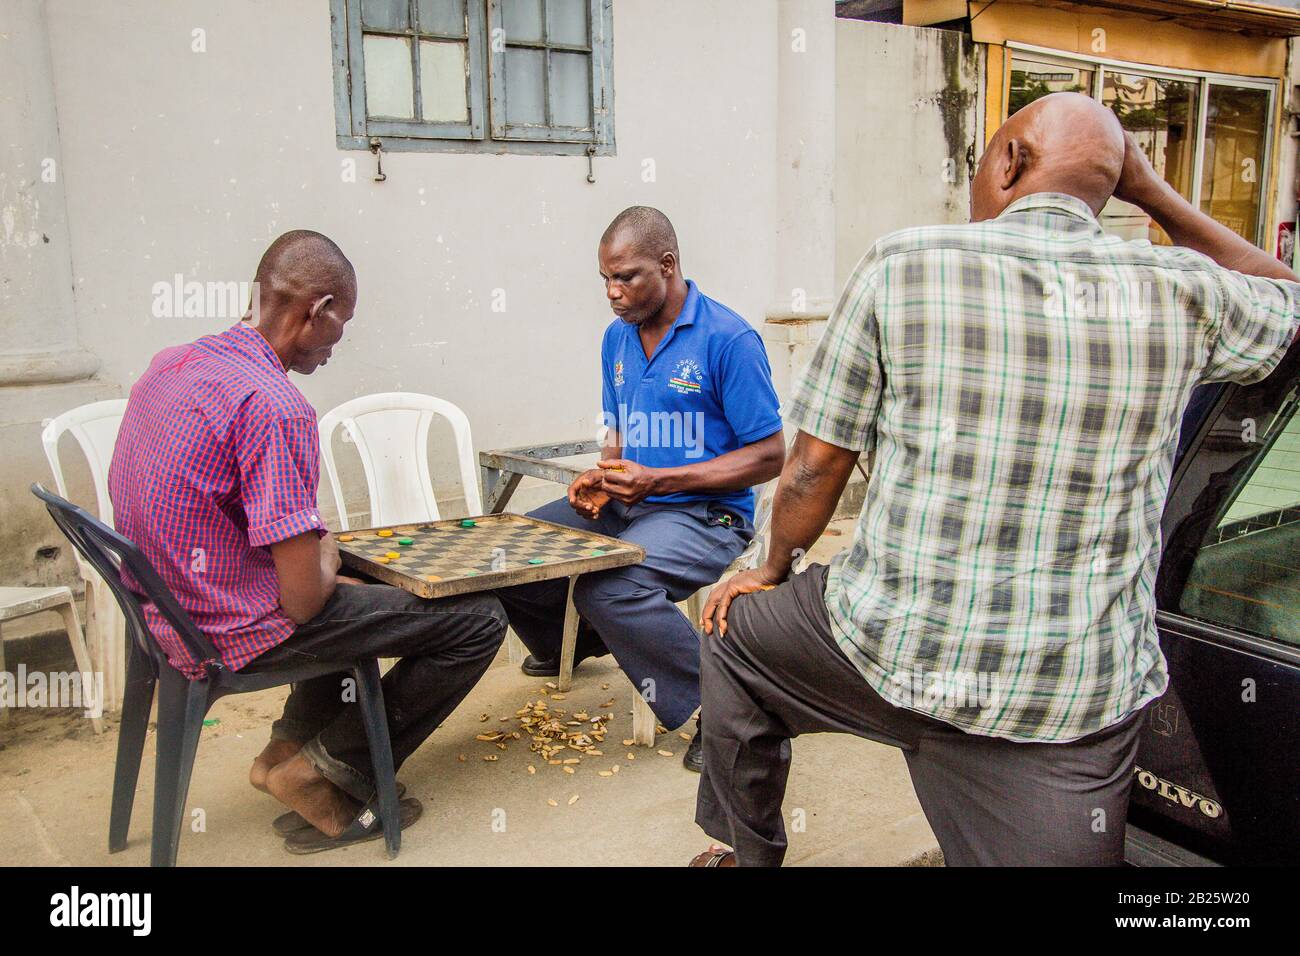 Three men play a game of draft on a street in Nigeria. Stock Photo